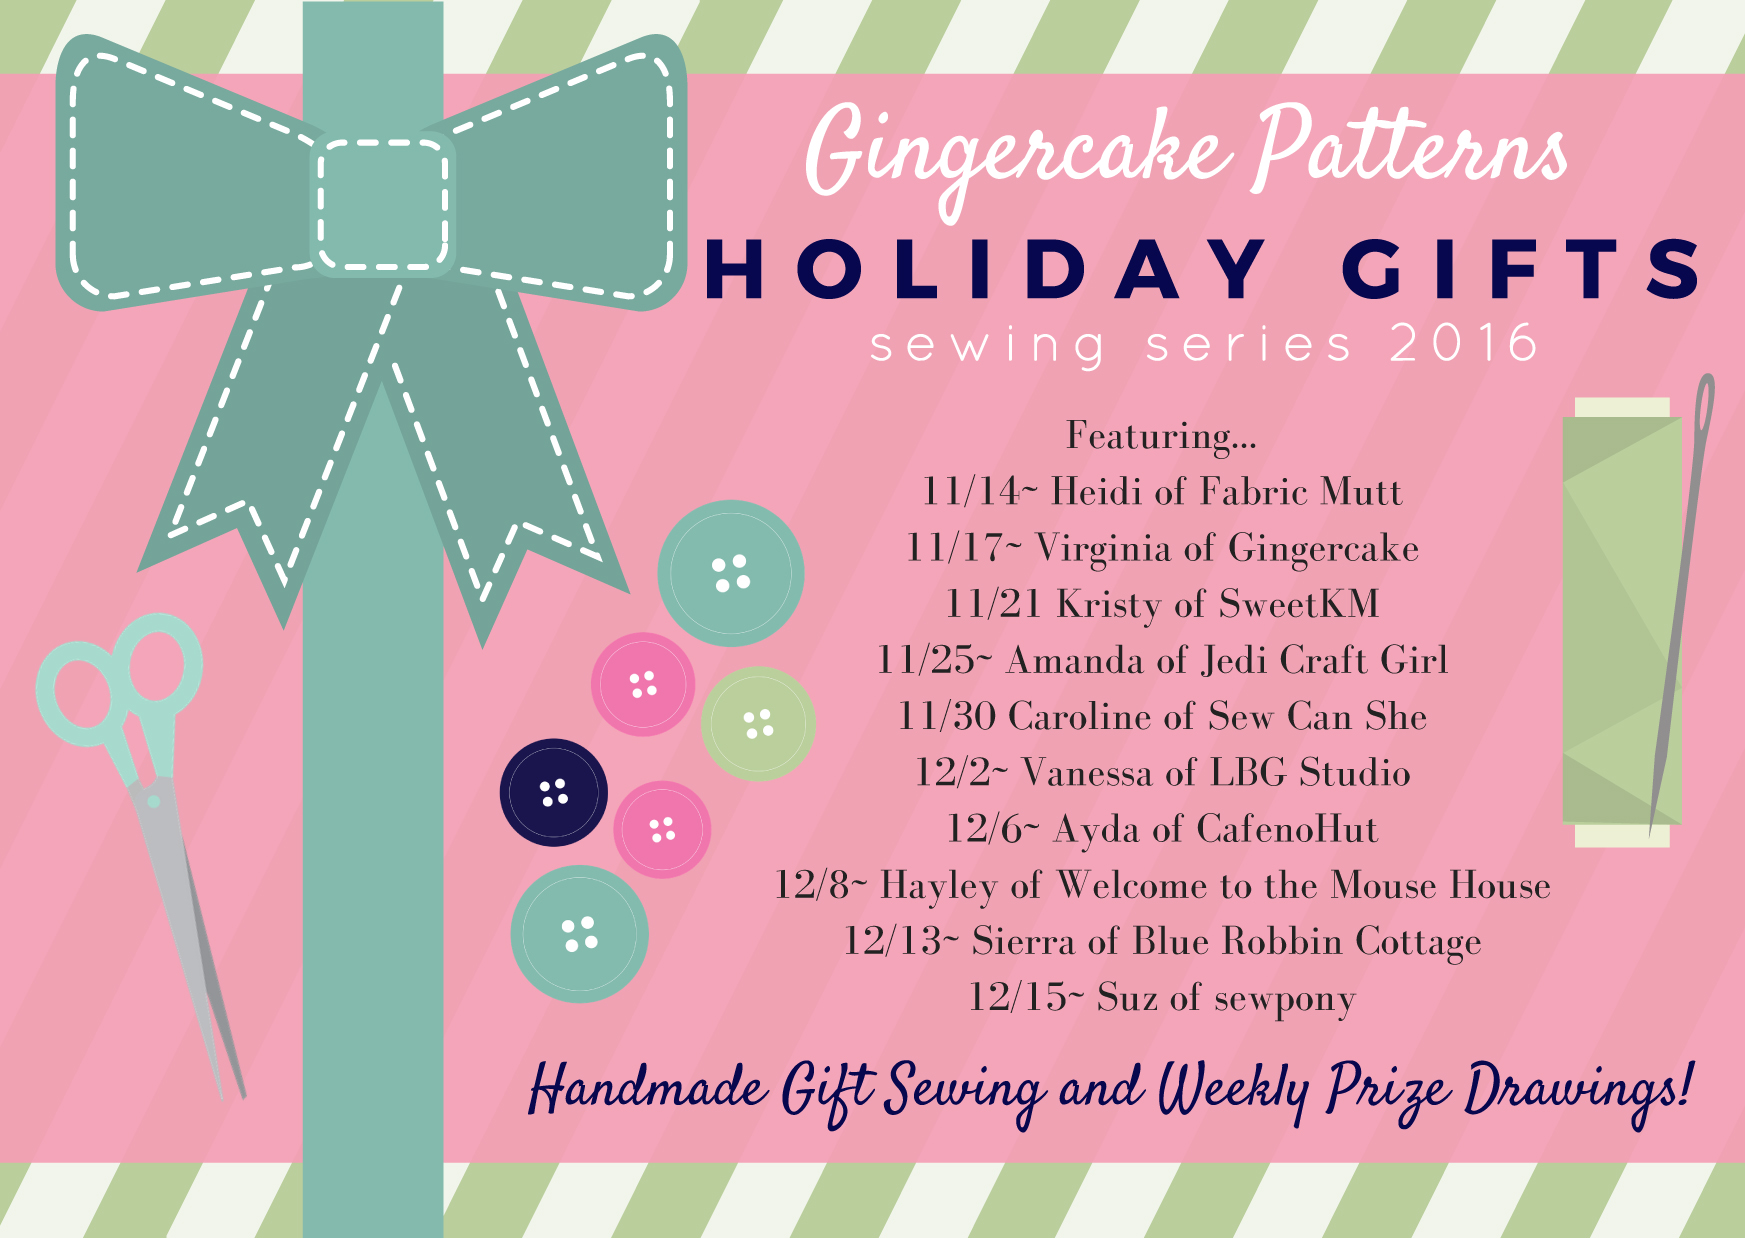 Gingercake Holiday Gifts Sewing Series 2016 and week 1 giveaway!